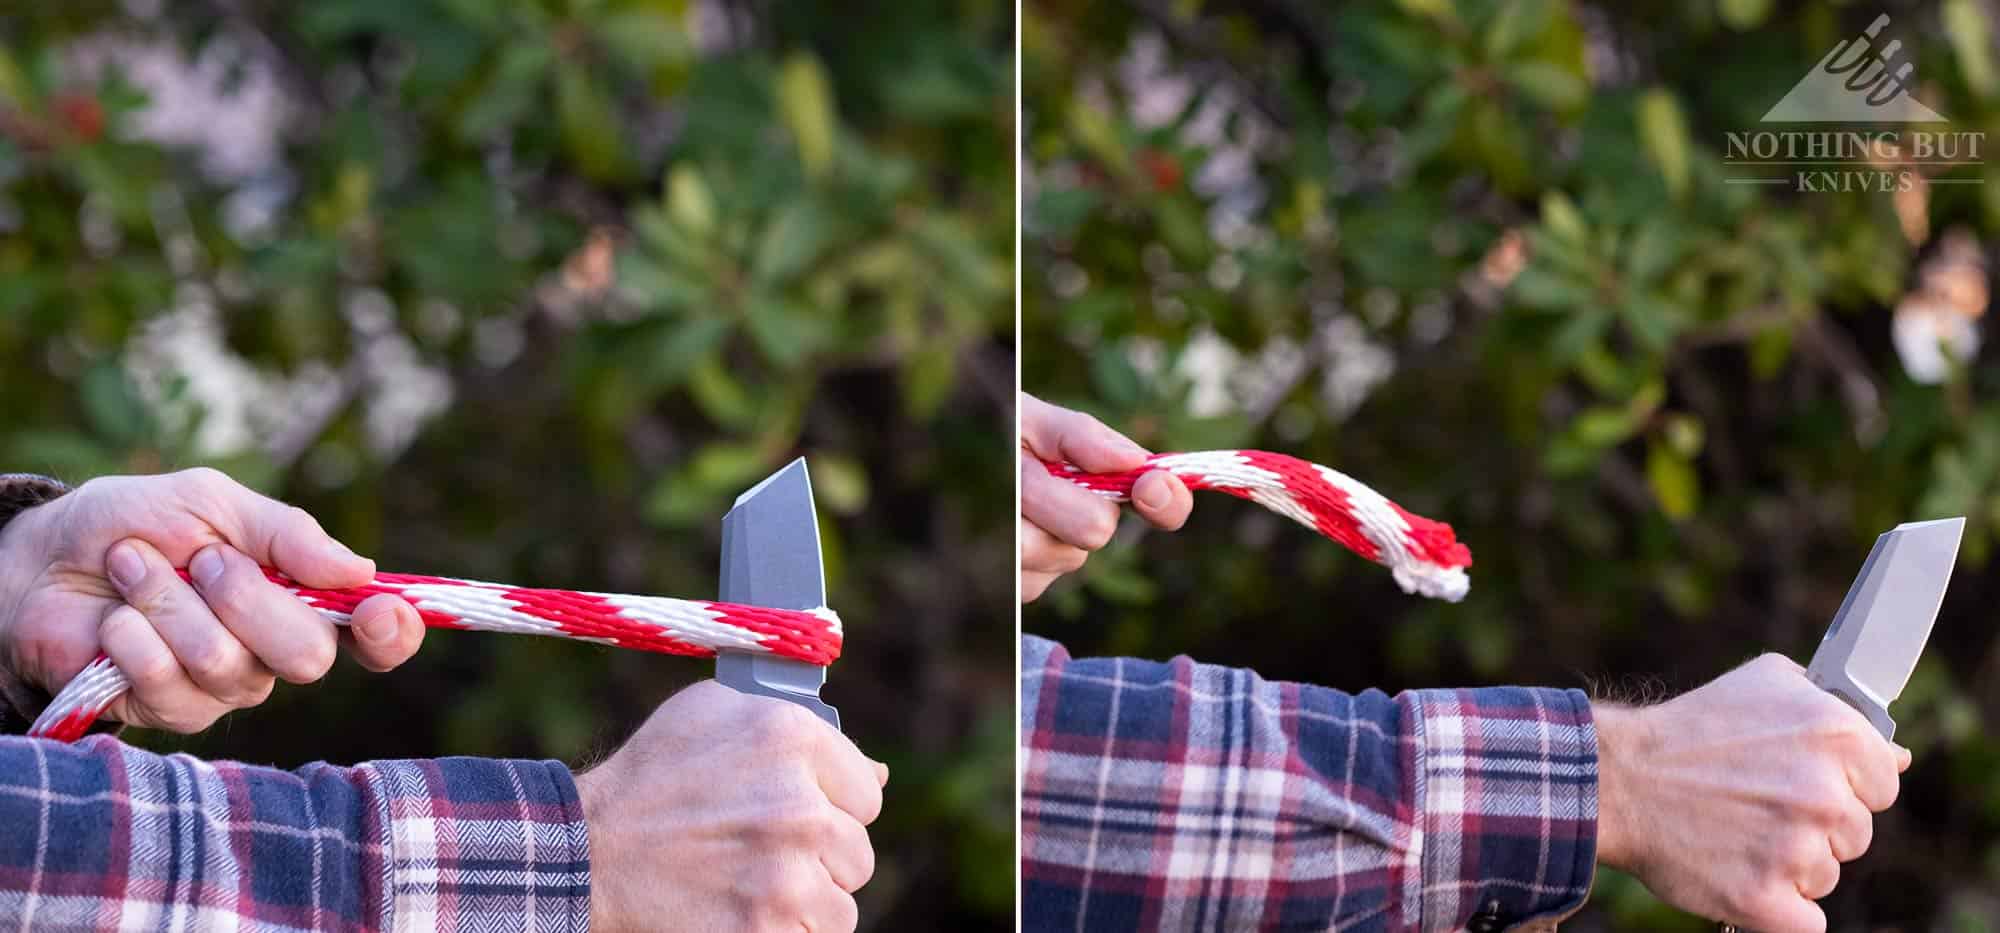 A two part image showing the Kizer Sheepdog knife cutting rope outdoors. 